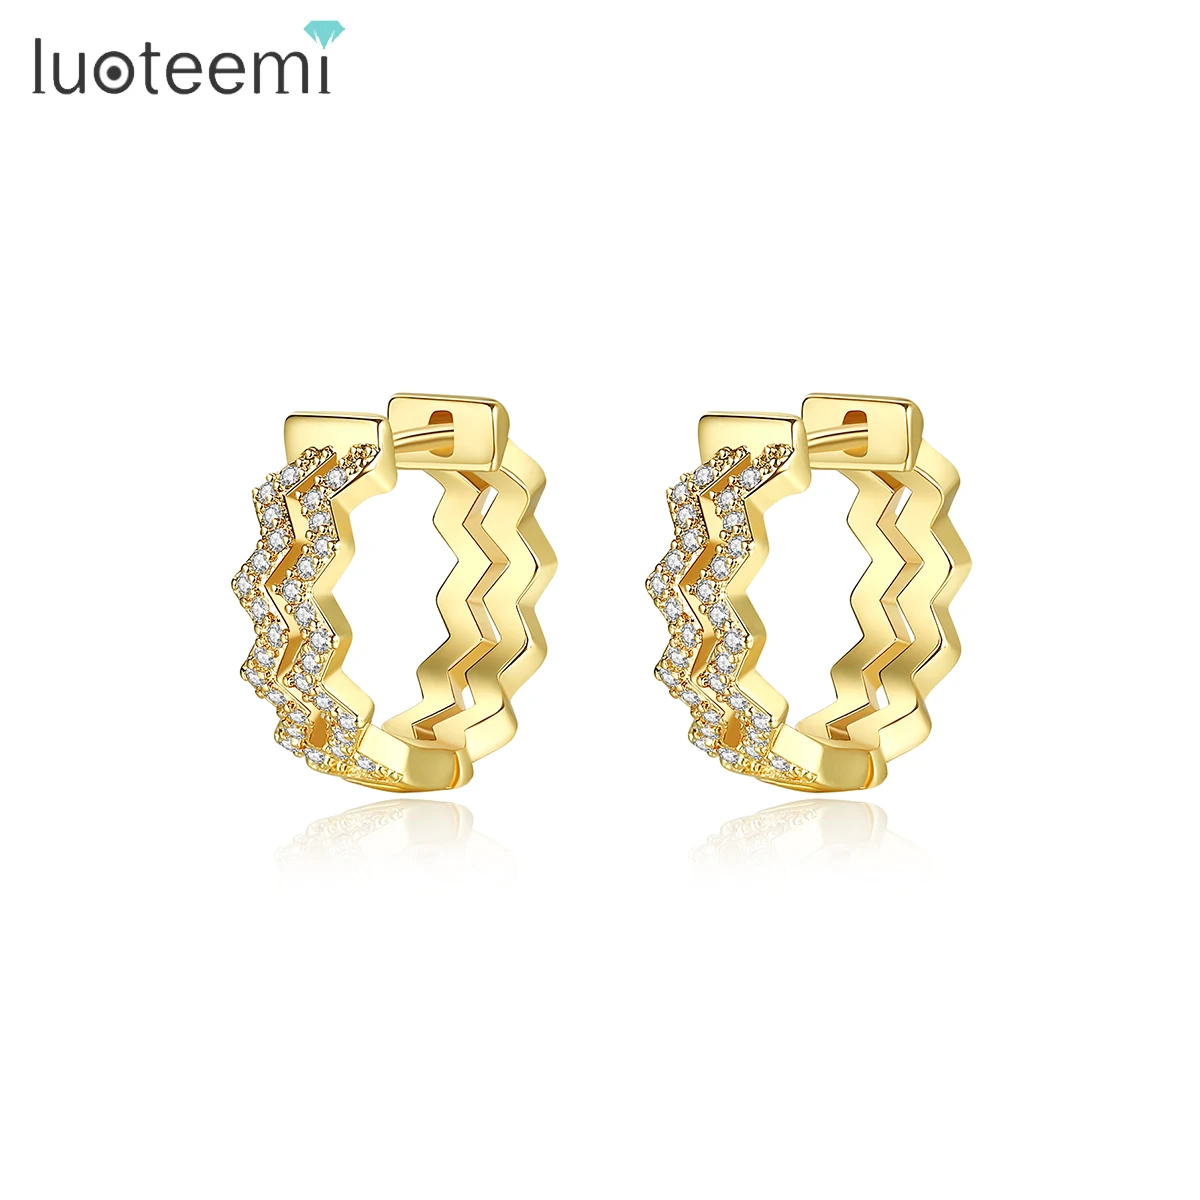 

LUOTEEMI Fashion Jewelry Gift Gold Plated Wavy Cubic Zirconia Crystals Huggie Earrings for Women